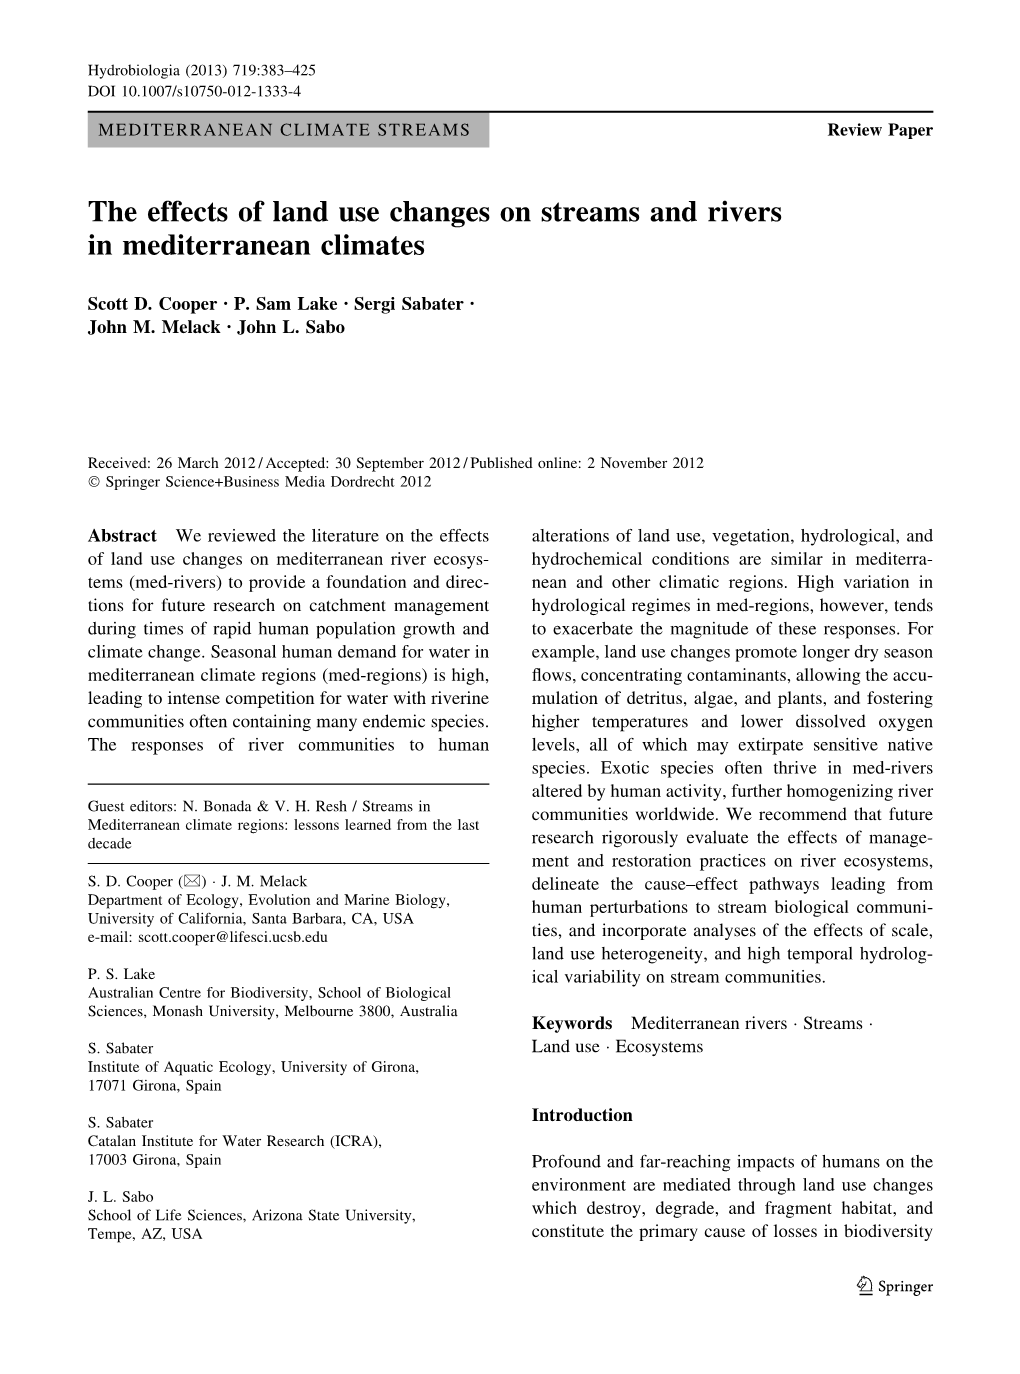 The Effects of Land Use Changes on Streams and Rivers in Mediterranean Climates